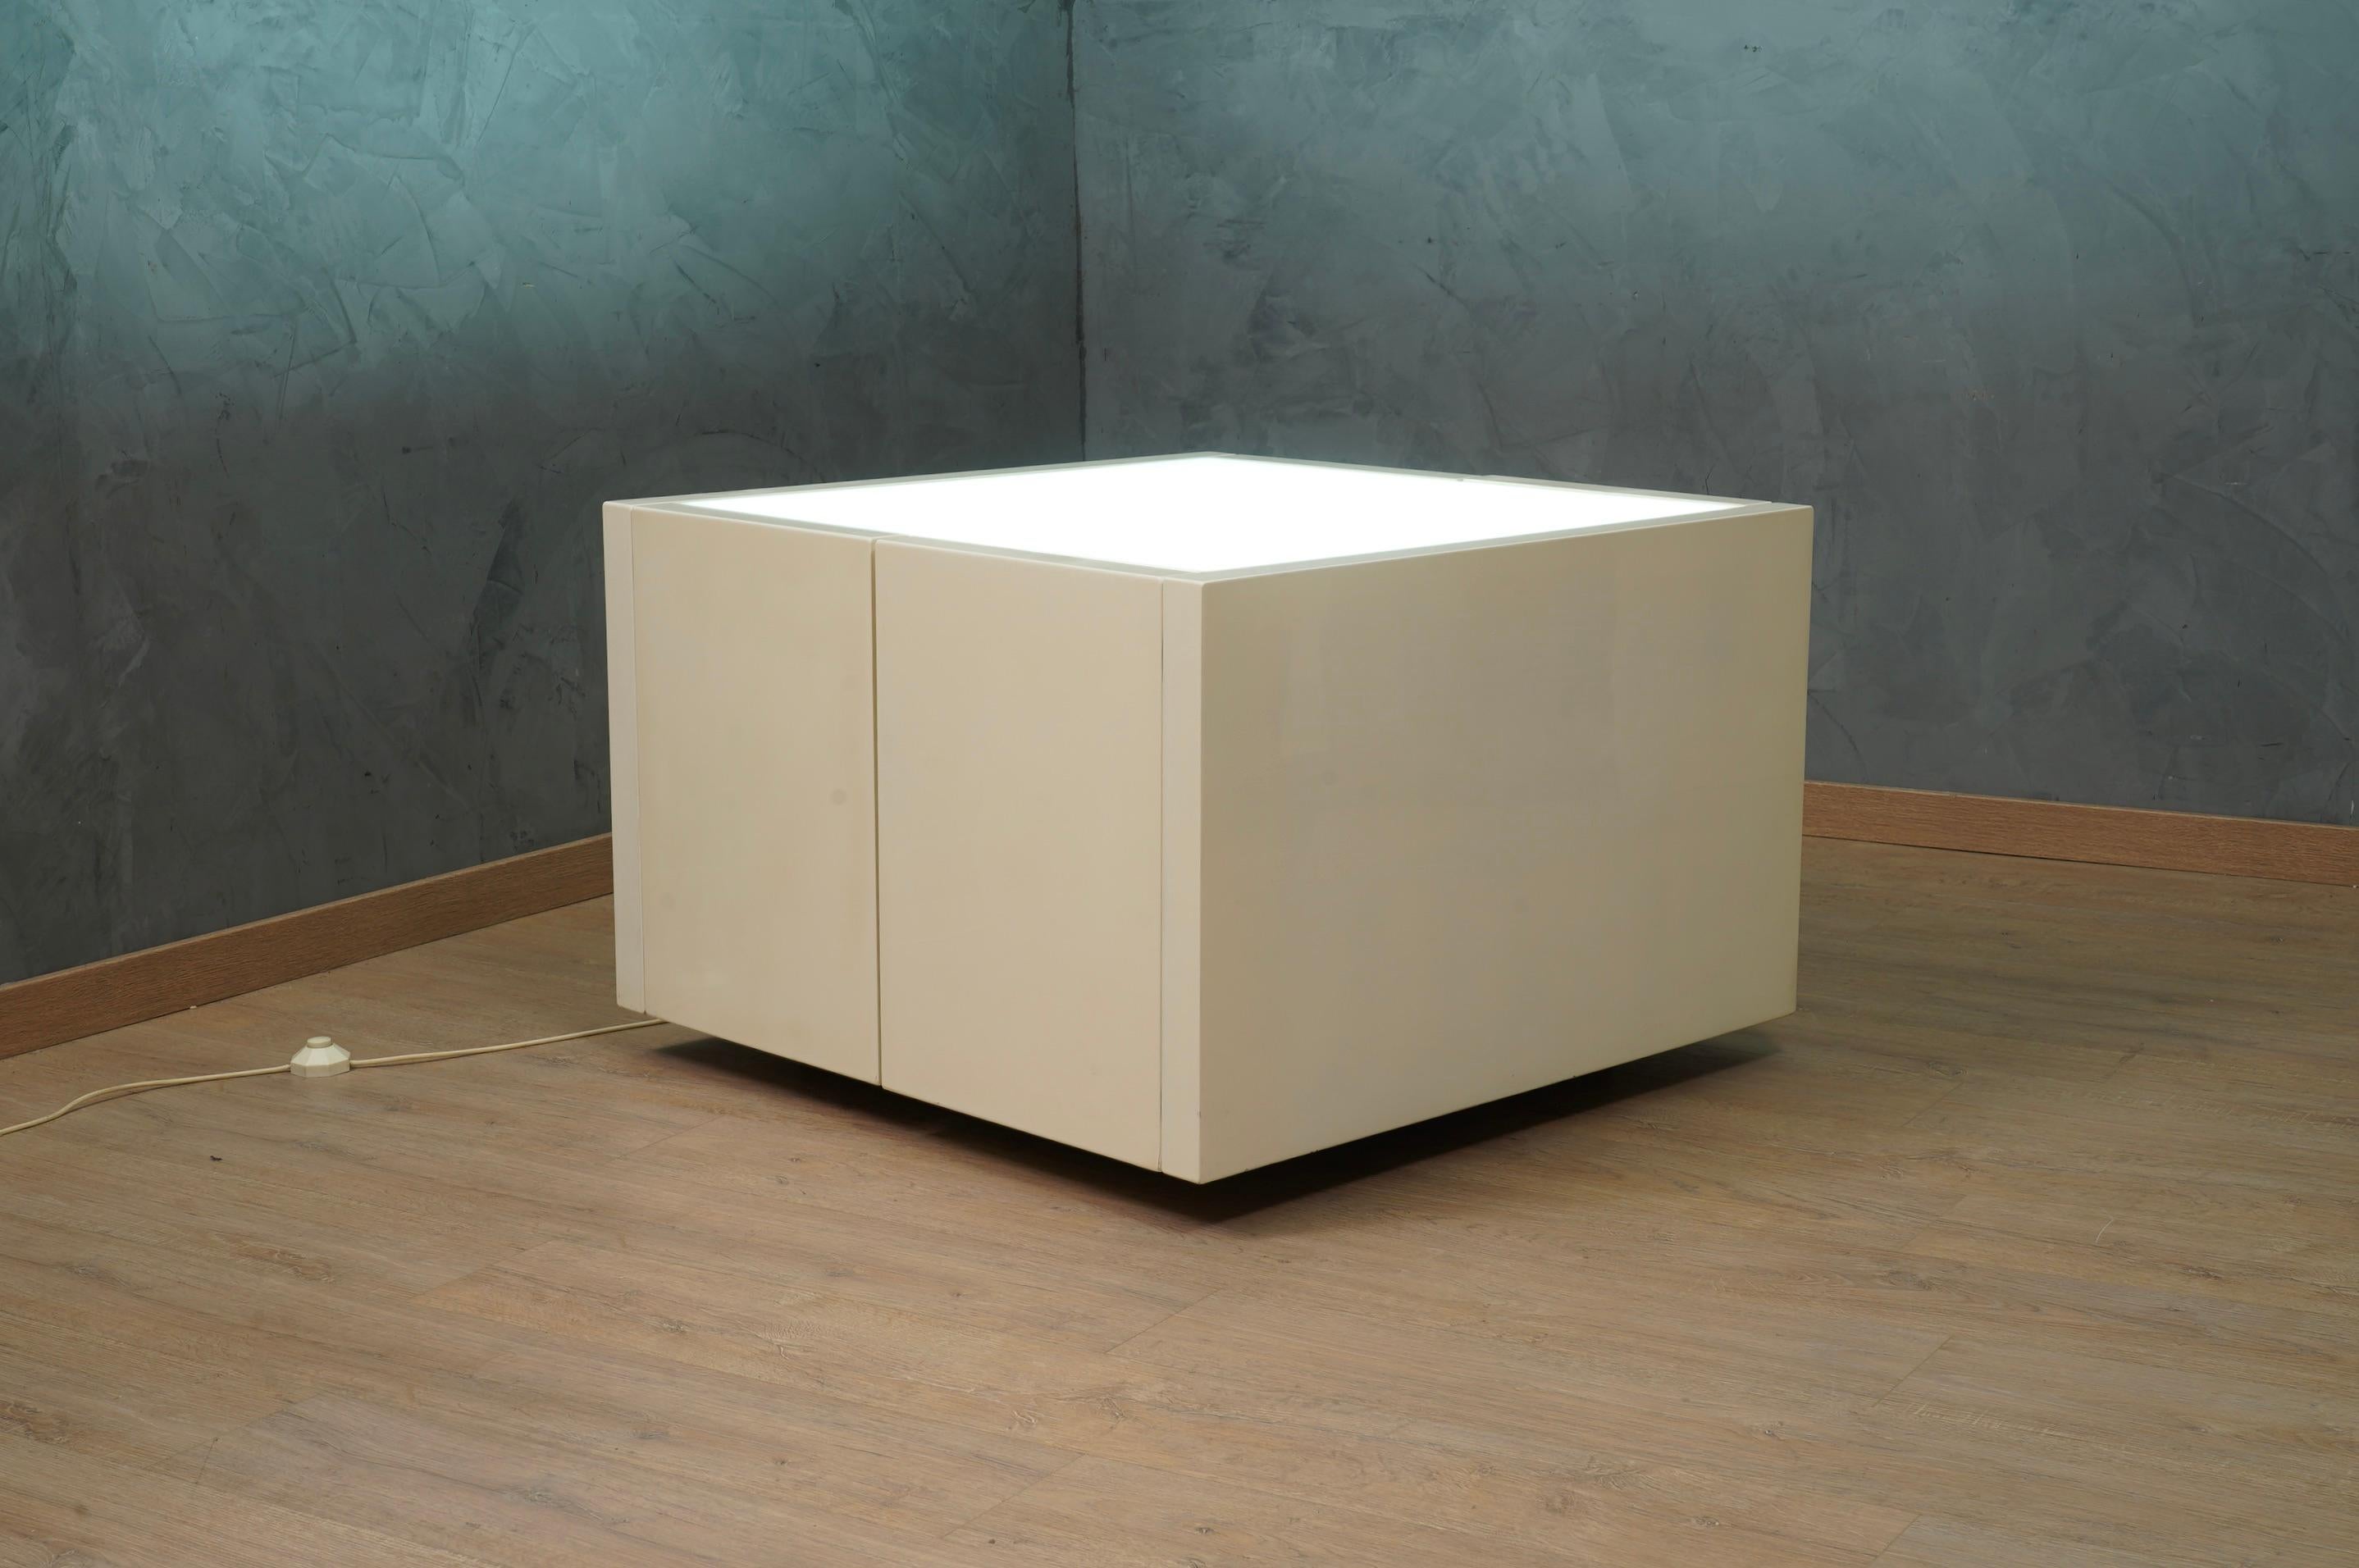 Historic side table mod. Saratoga with illuminated top in white lacquered wood. If you can design one thing, you can design everything, said Massimo Vignelli (1931-2014). Produced by Poltronova.

The side table is made up of a series of modules in